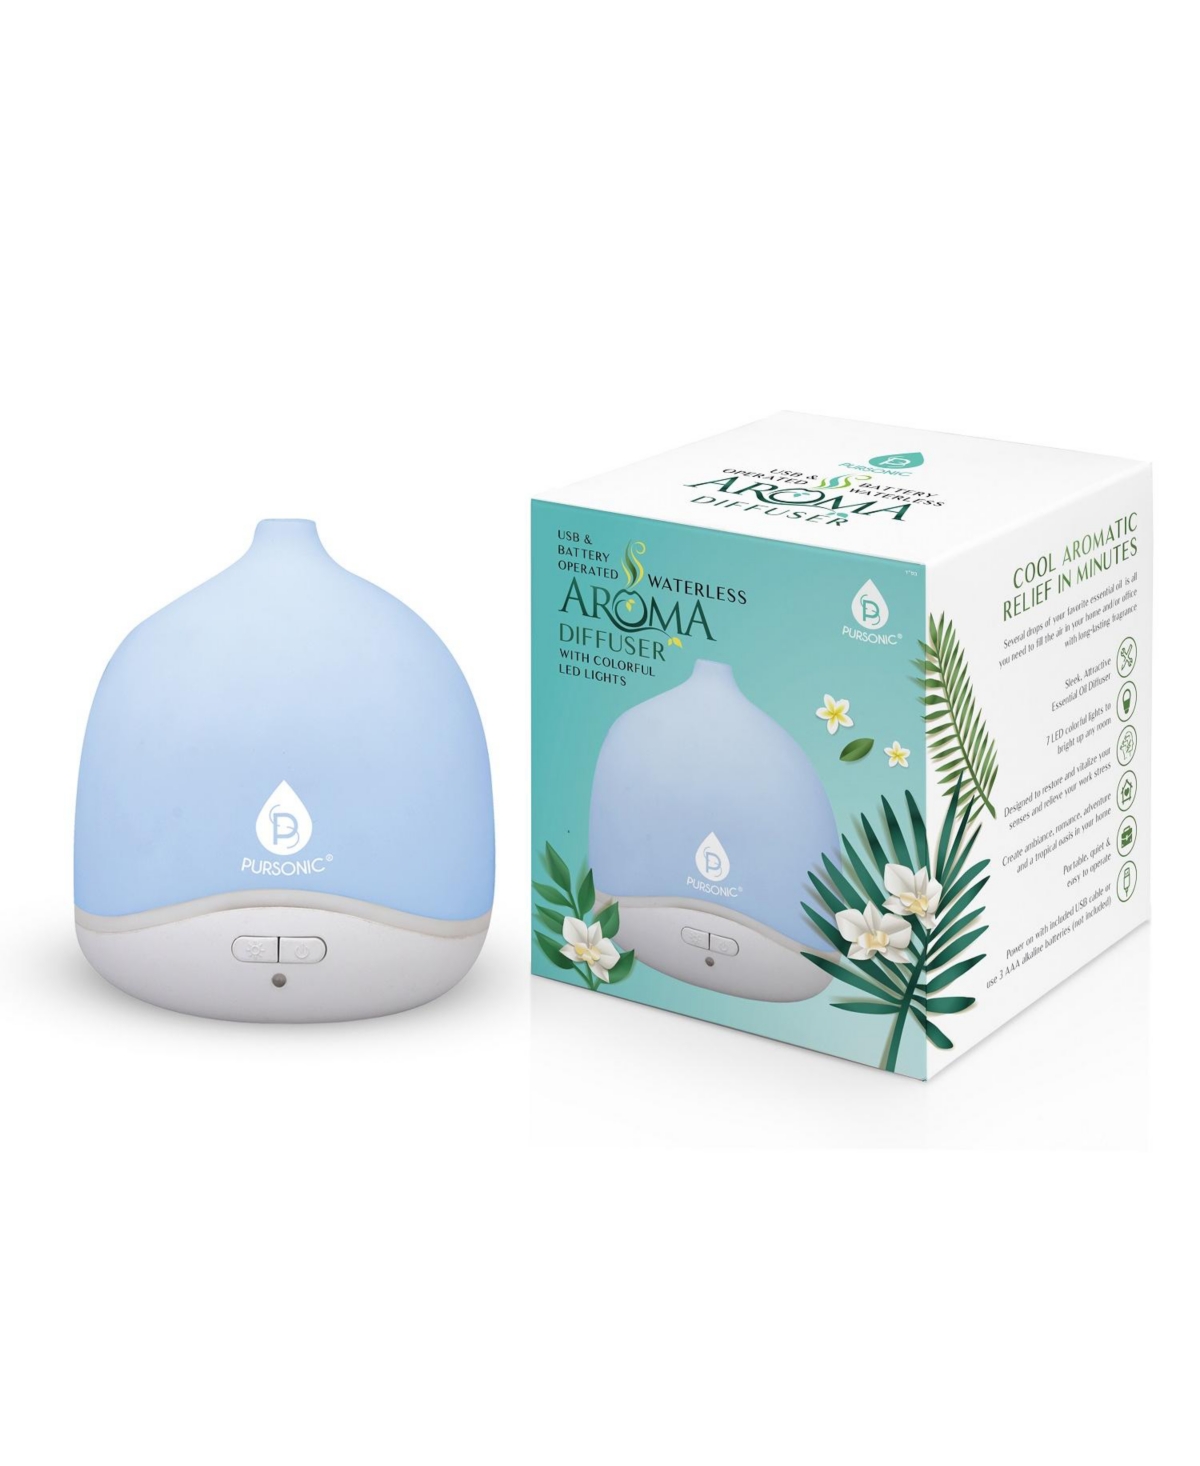 Usb & Battery Operated Waterless Aroma Diffuser - Blue